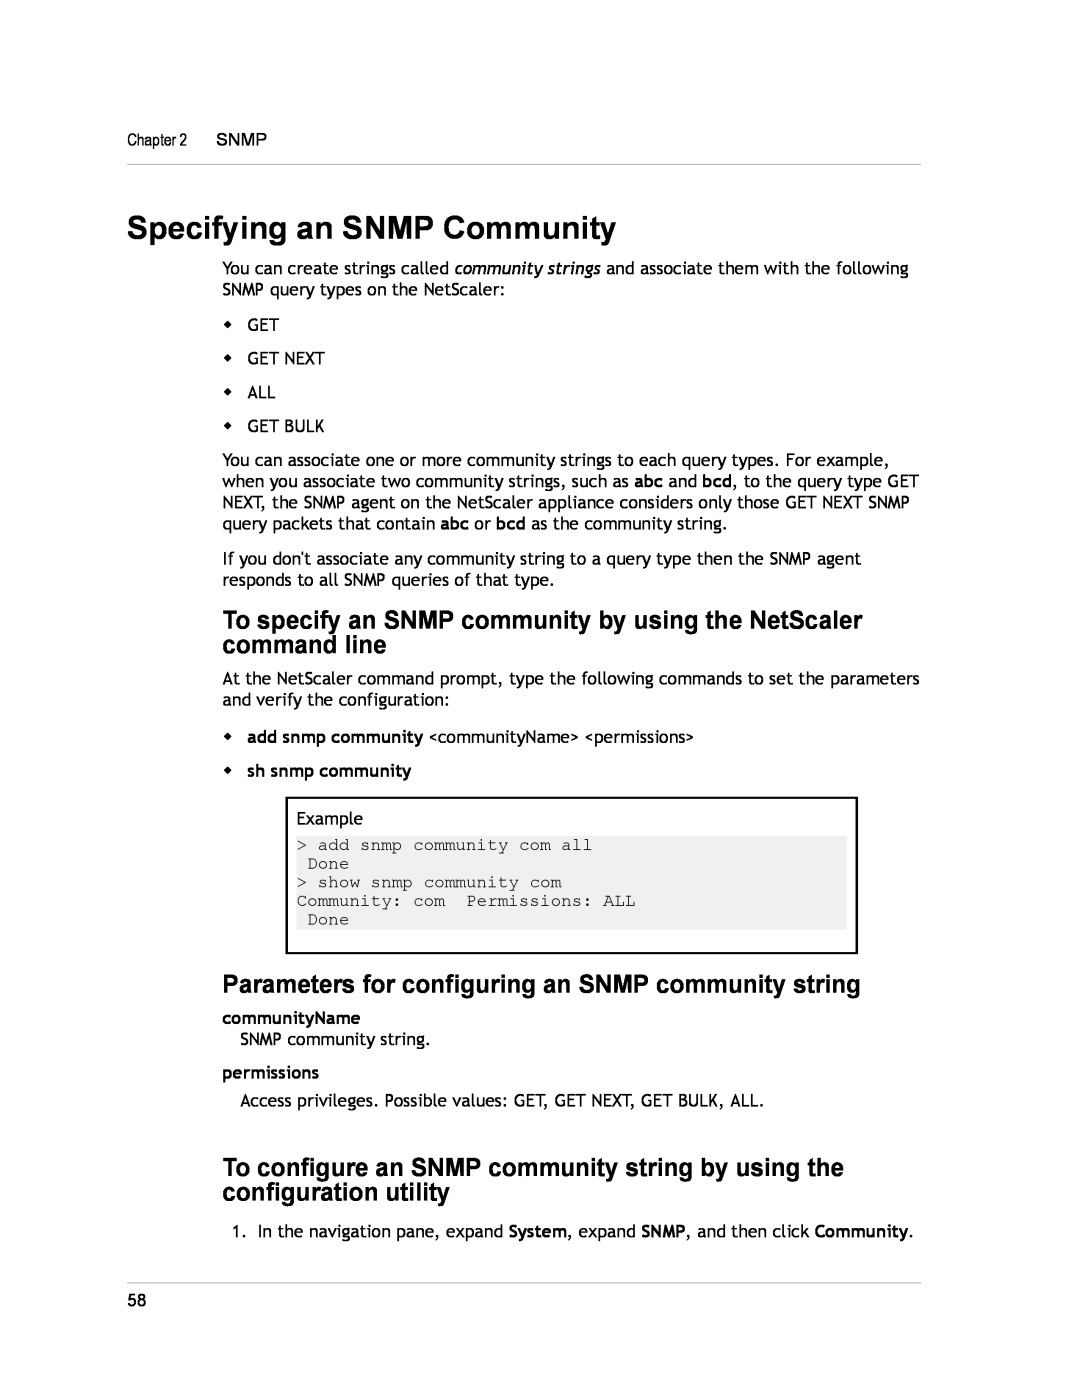 Citrix Systems CITRIX NETSCALER 9.3 Specifying an SNMP Community, Parameters for configuring an SNMP community string 